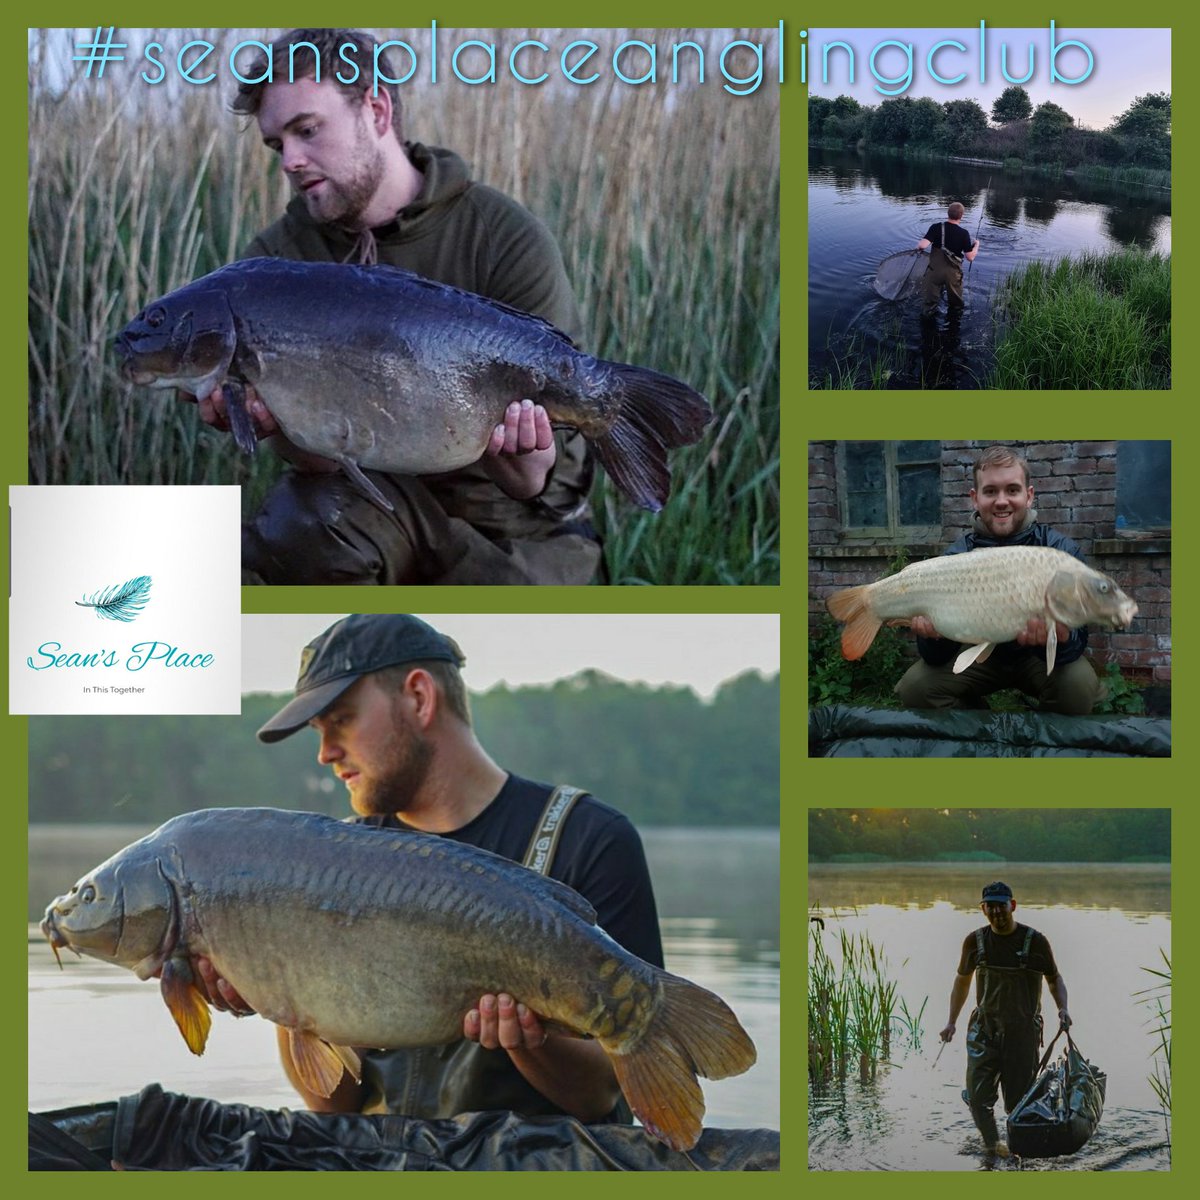 Meet our team 😀🎣
@MattieRogers95 is an all round top guy who knew our sean very well and understands fully what we are trying to achieve at #seansplace he is always on hand to help out and give our members any tips and pointers to help them progress in their own angling 😀🎣❤